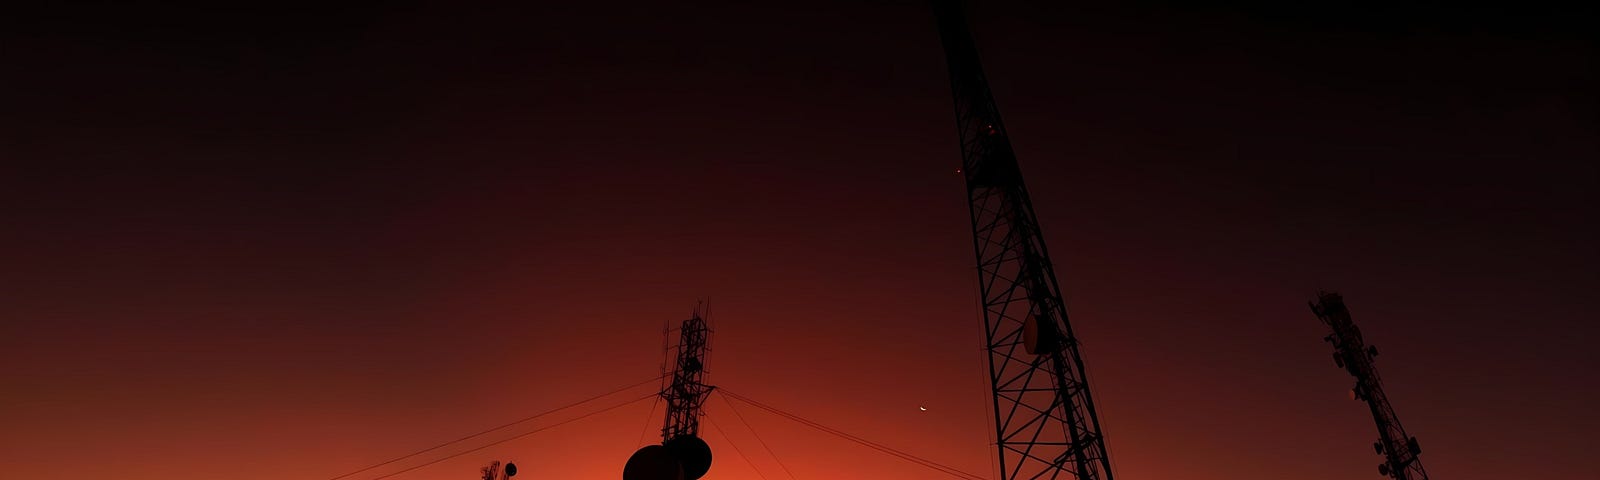 Radio Towers in Brazil at Sunset